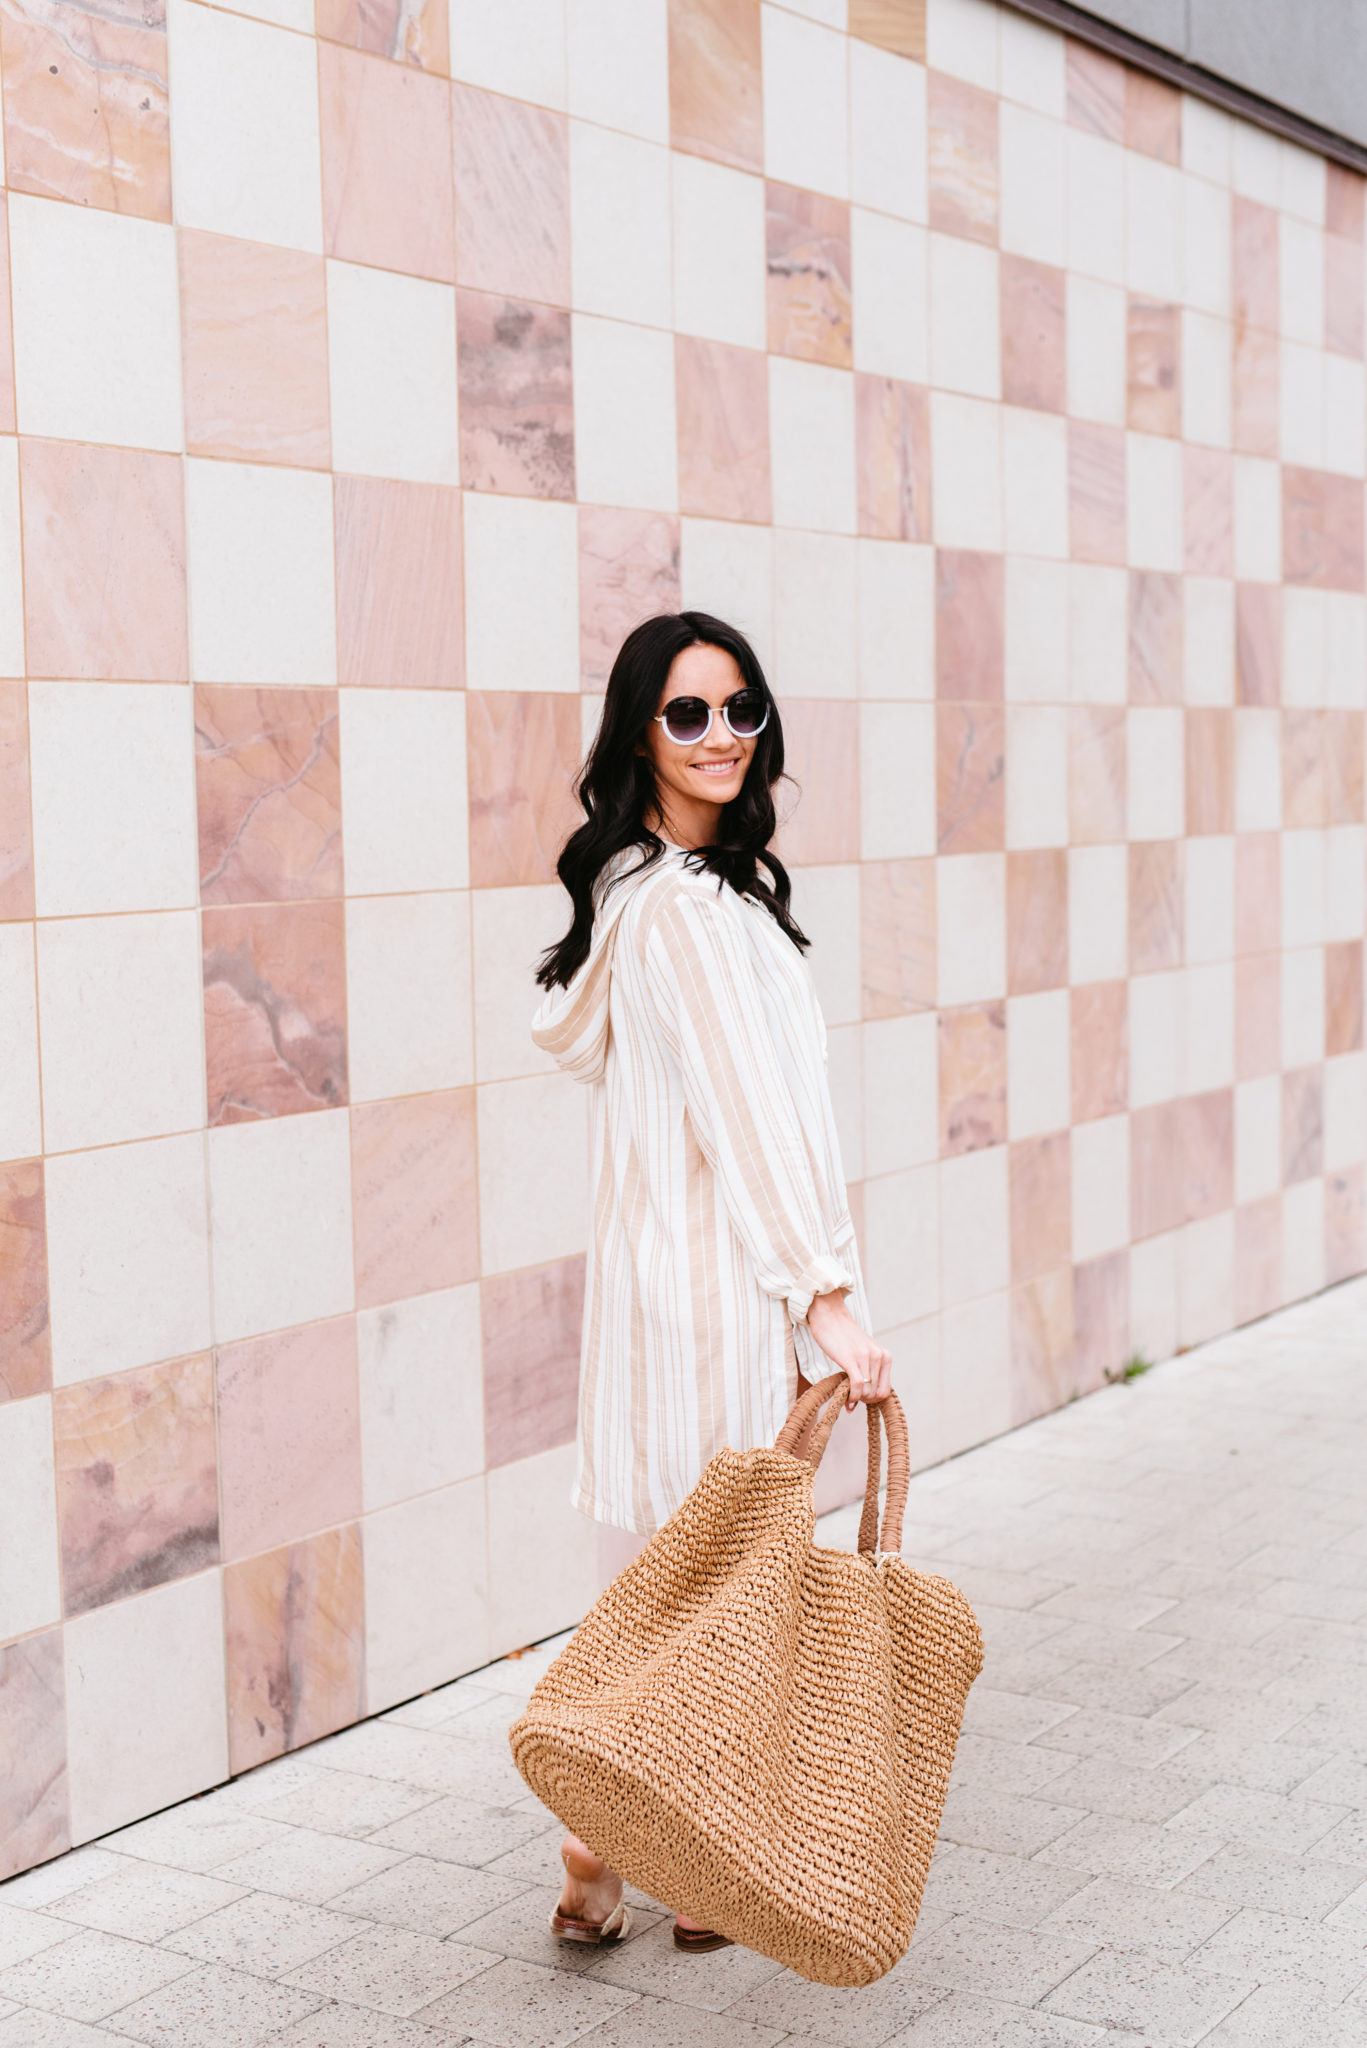 Top 15 Cute Swimsuit Coverups for Spring & Summer featured by top US fashion blog, Outfits & Outings: image of a woman wearing an L Space striped swimsuit coverup, mules, Nordstrom raffia tote and BP round sunglasses